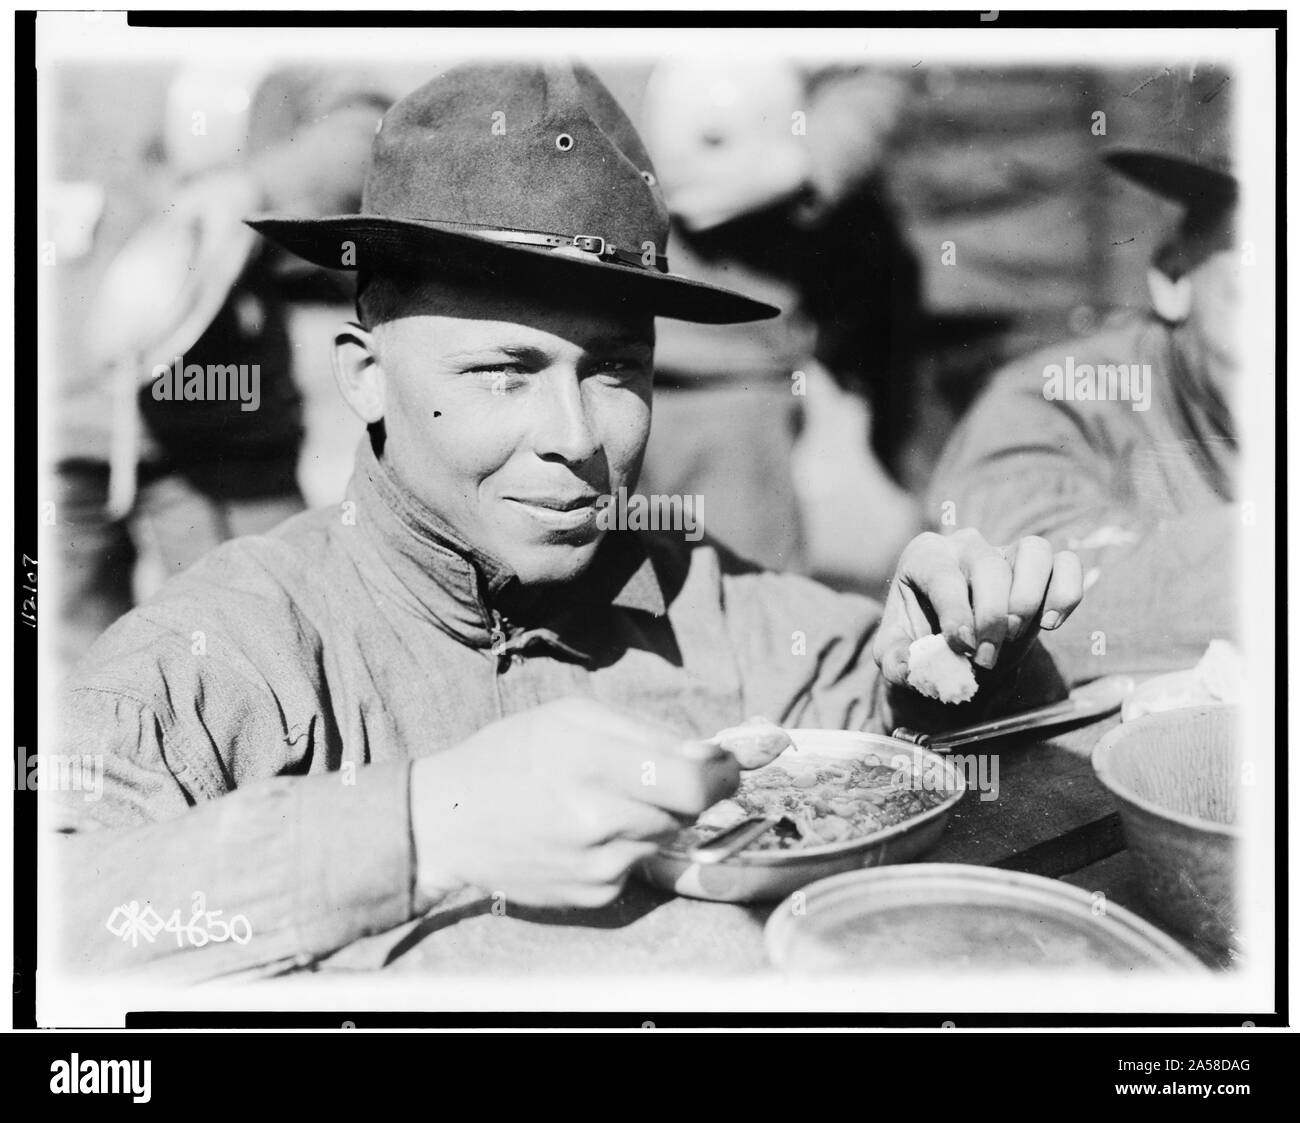 U.S. Army soldier eating Stock Photo